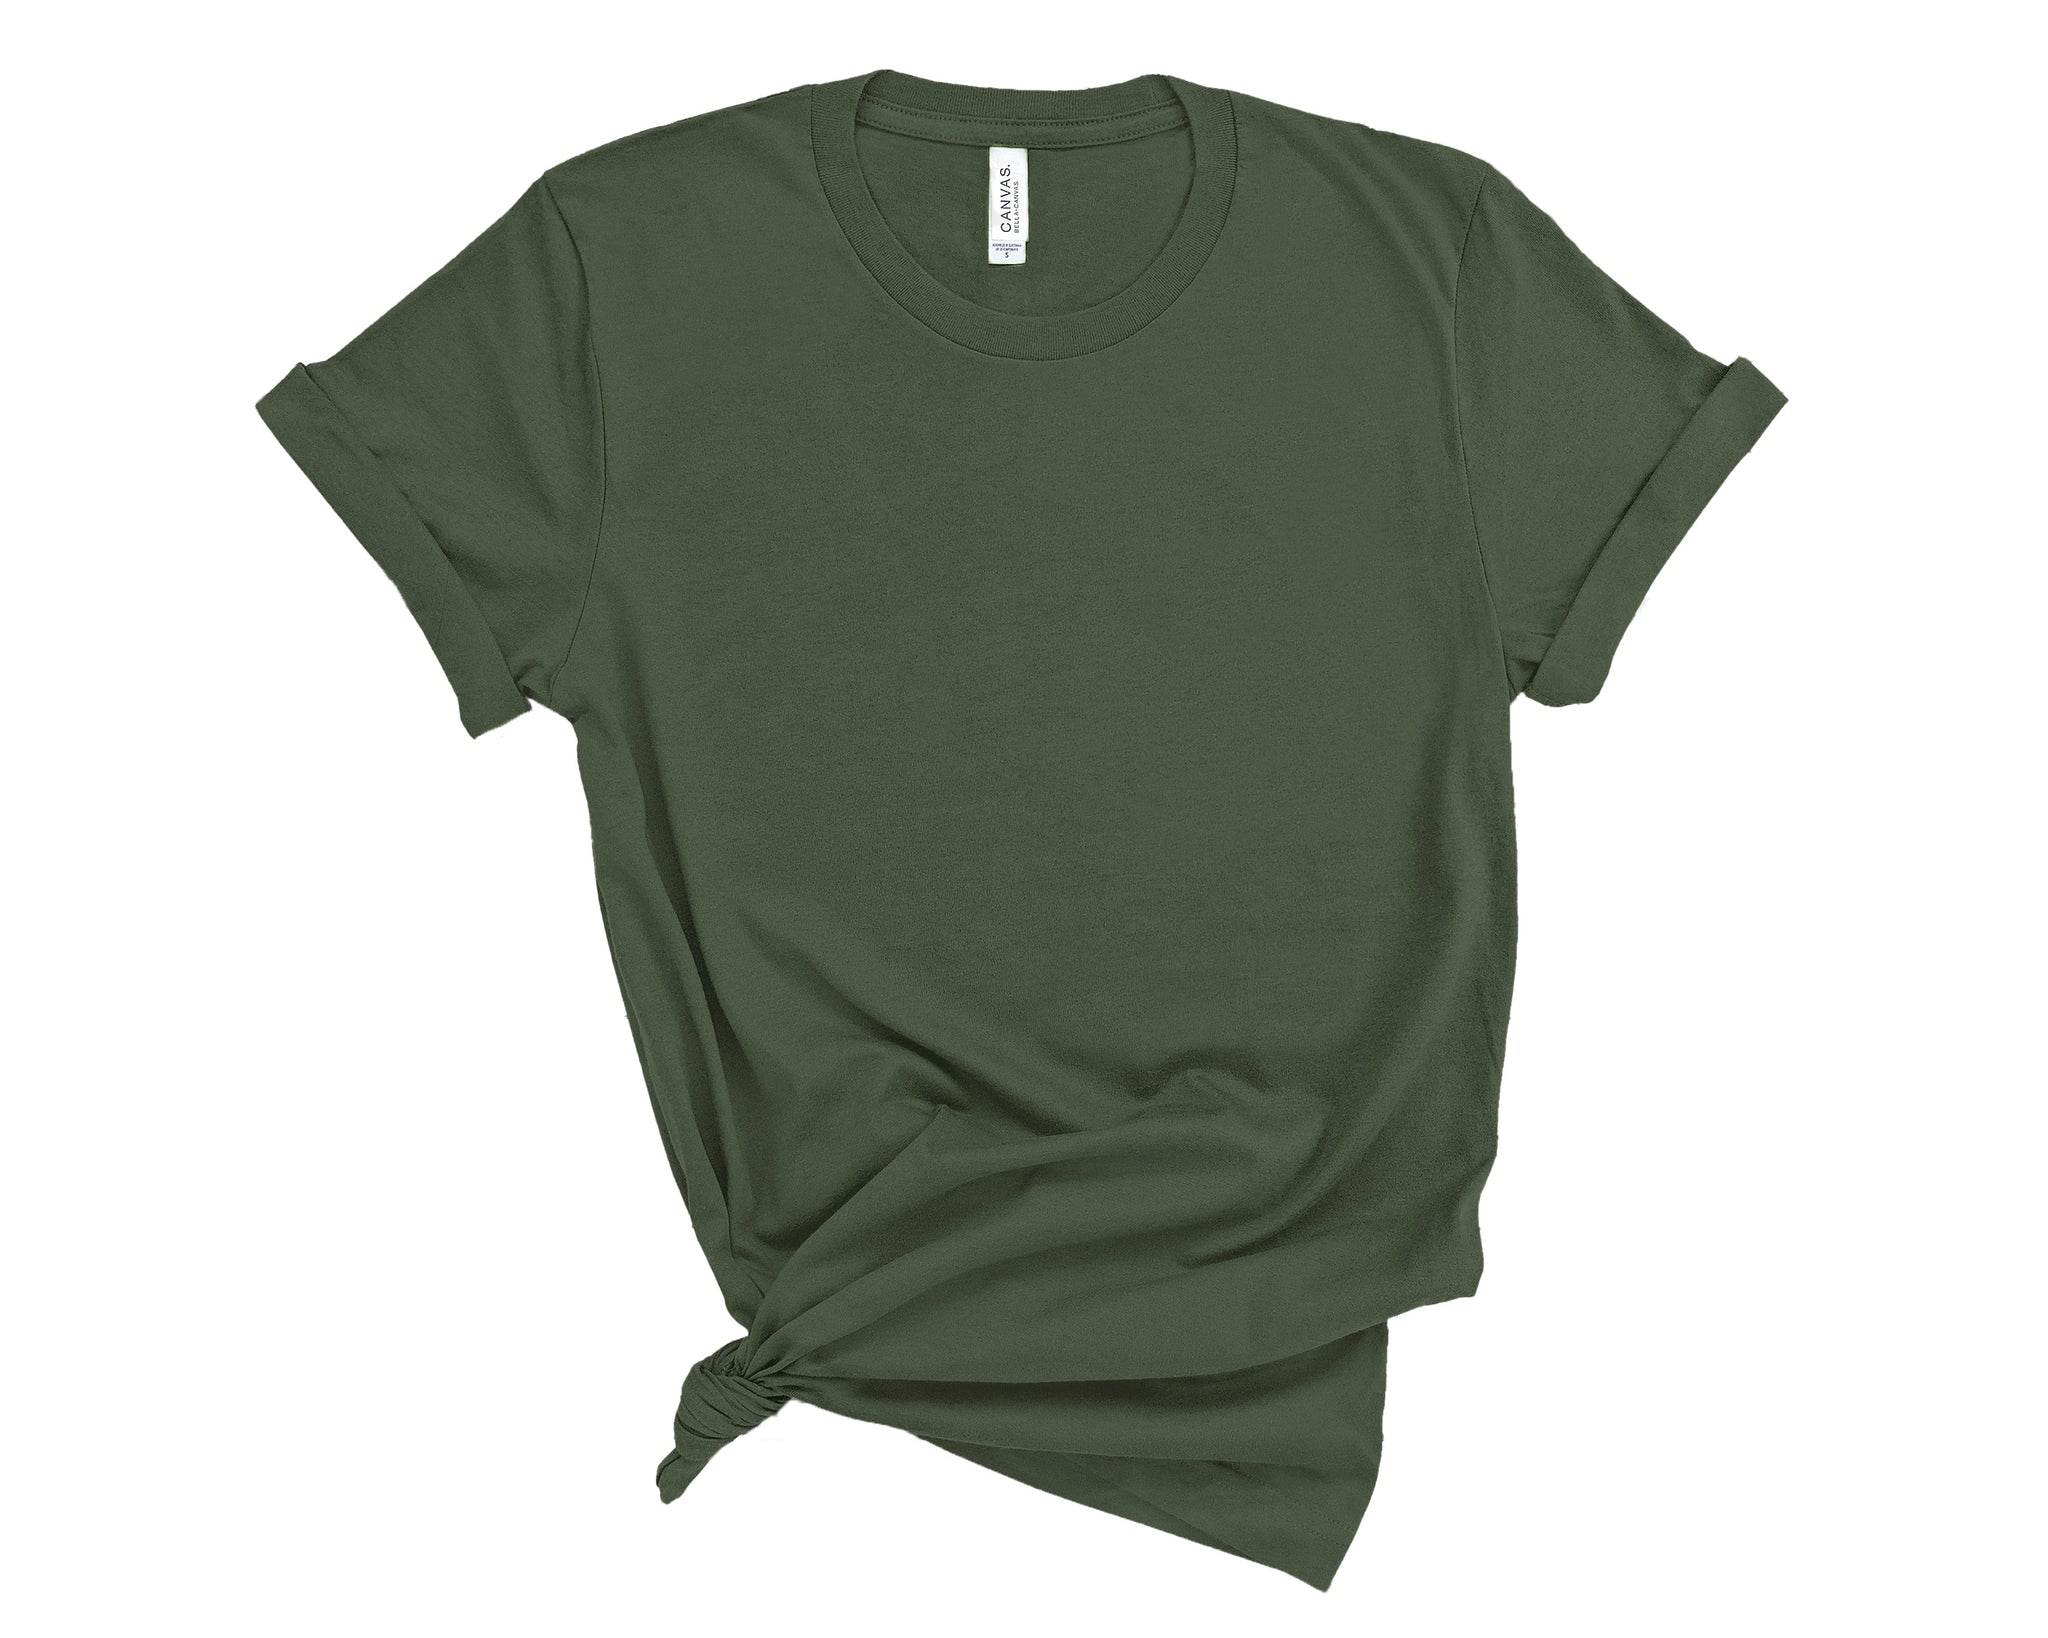 Team Kaylee Style (SOLID COLOR T'S)